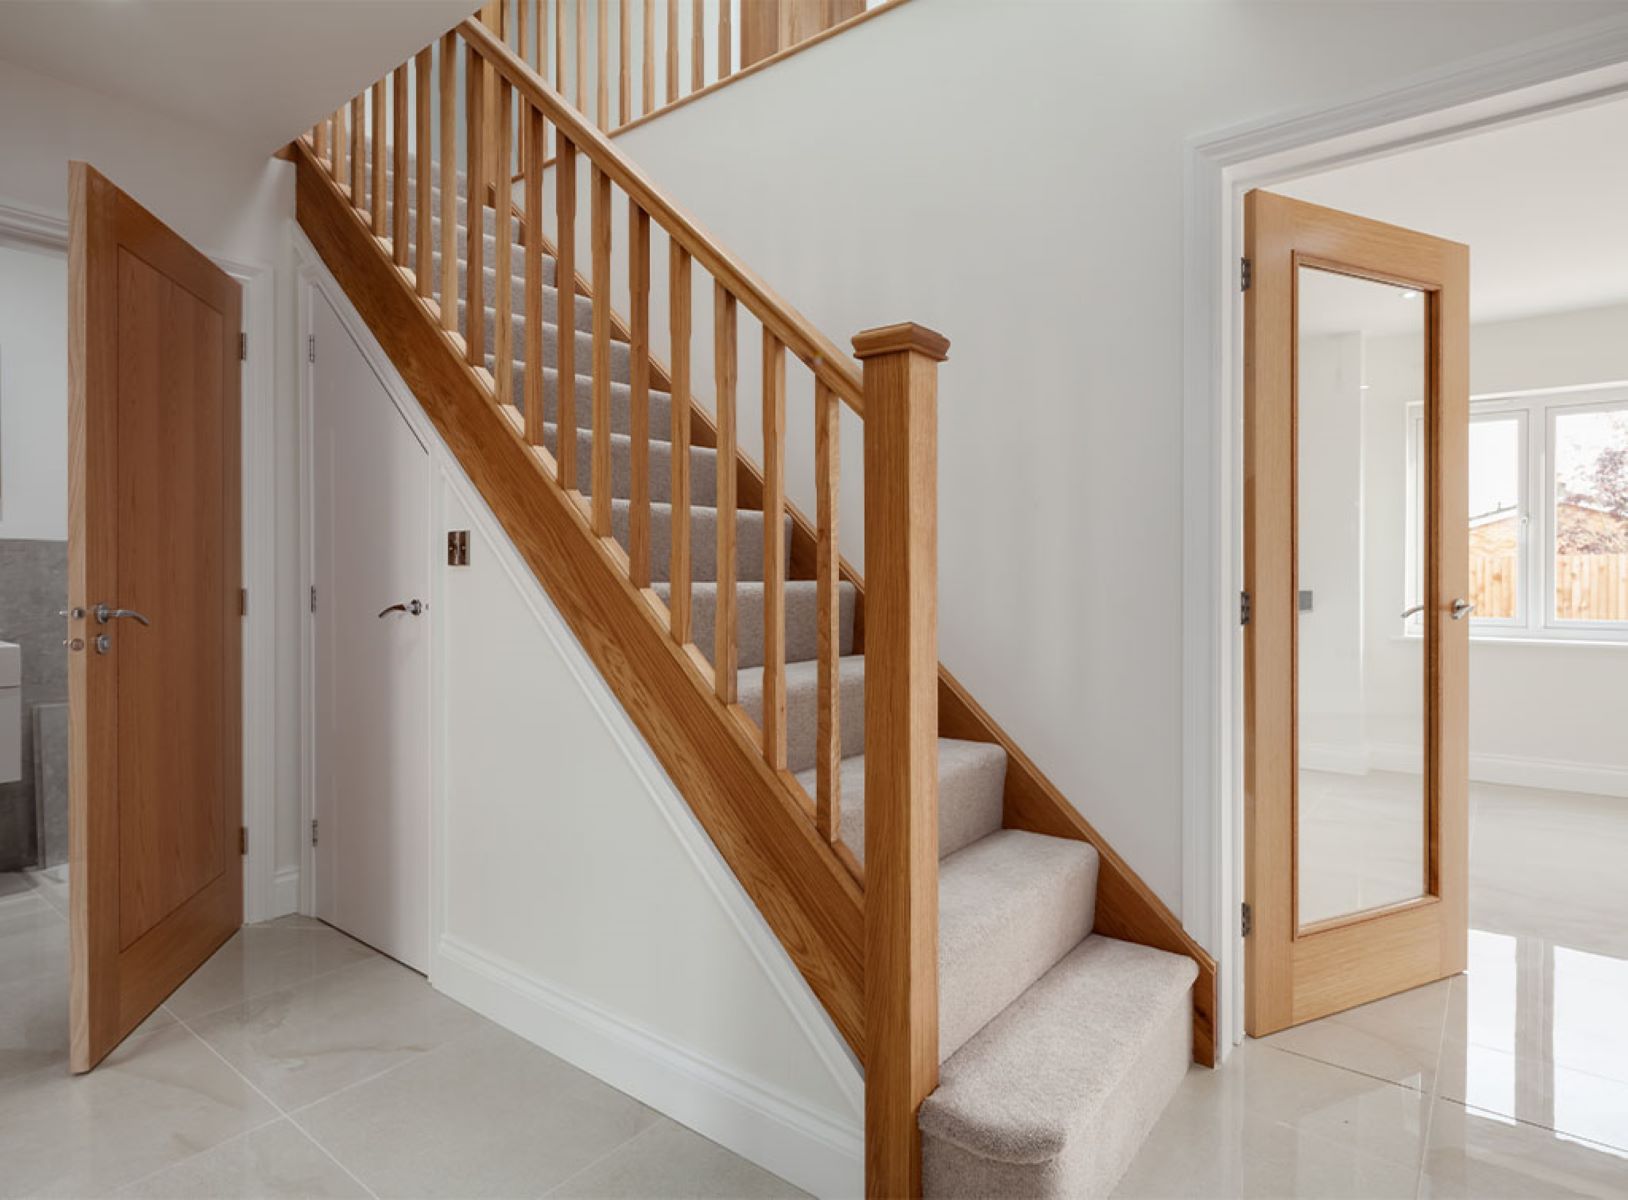 How To Fix Squeaky Stairs Without Removing A Carpet